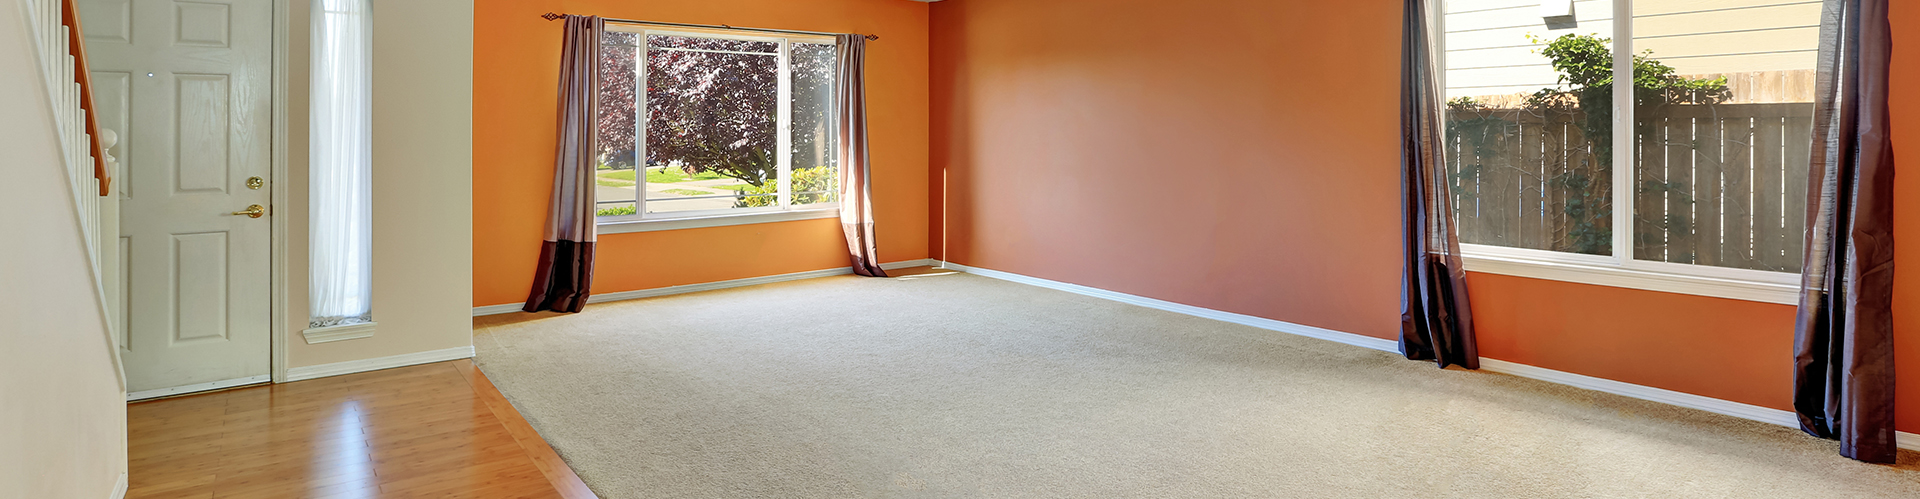 Carpeted Lounge Area | Shane's Built-In Vacuums Ltd.